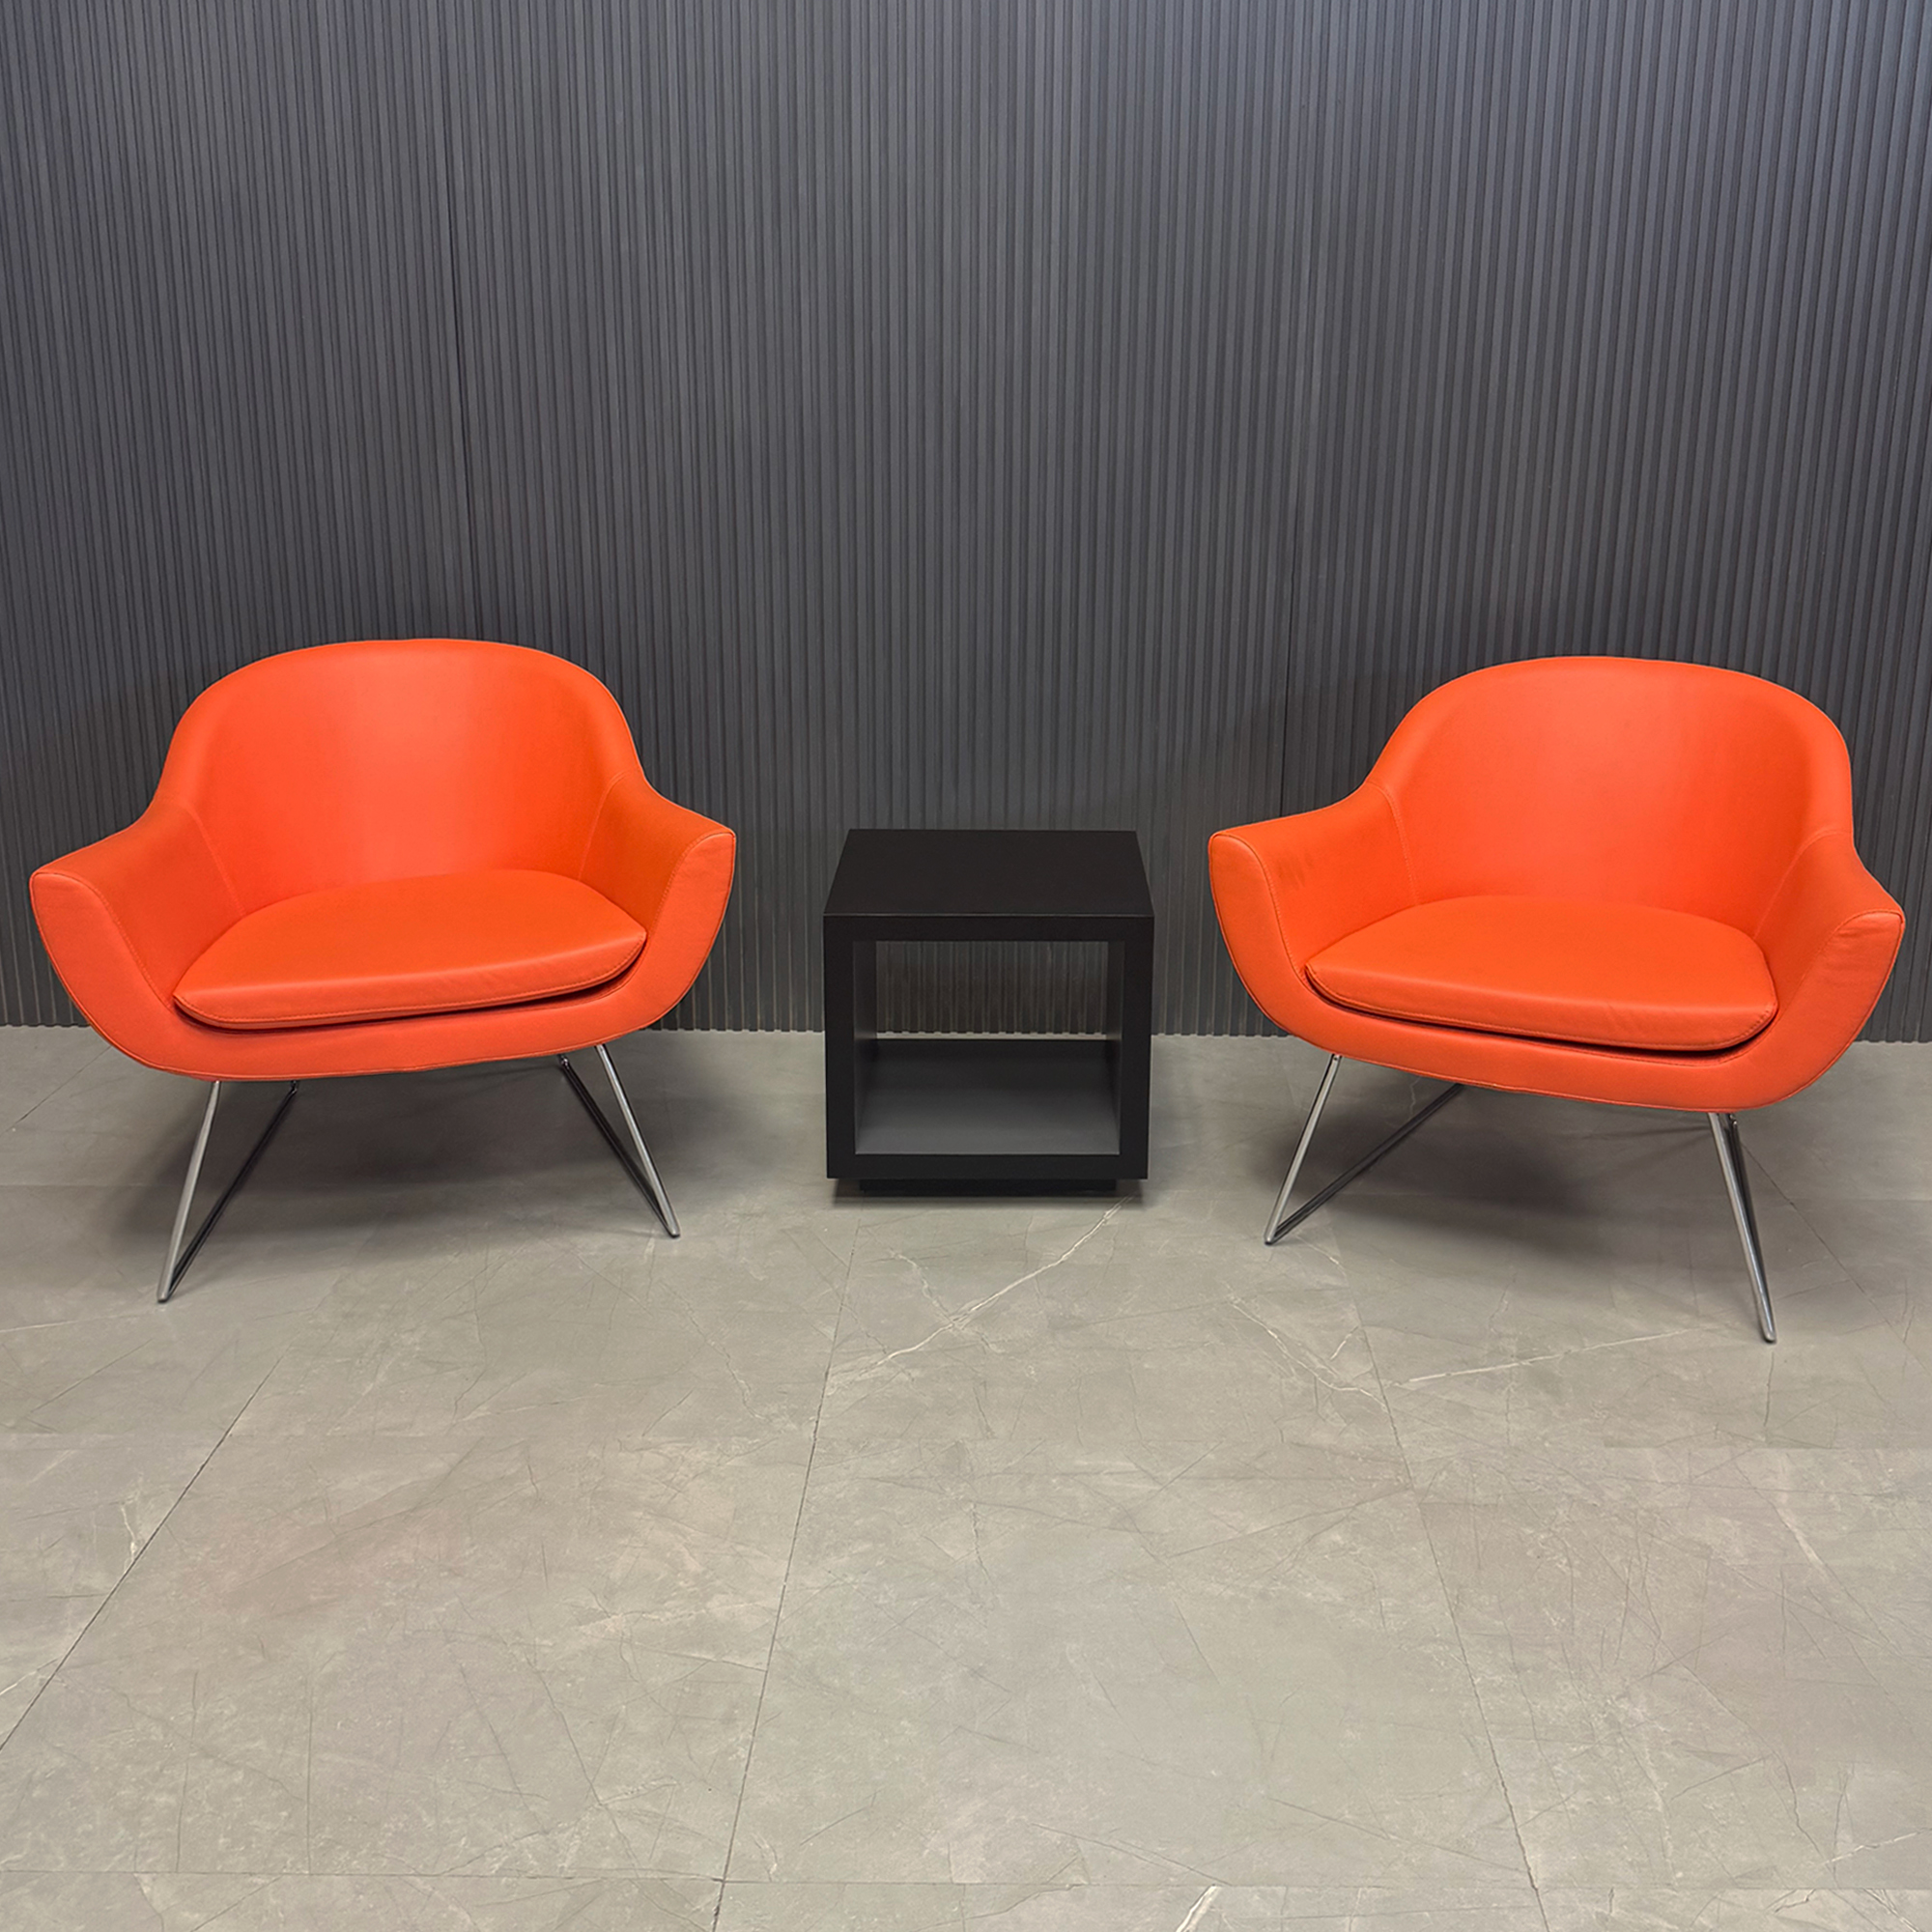 Madison Wire Sleed Lounge in Orange Leatherette - Set Of 2, shown here.